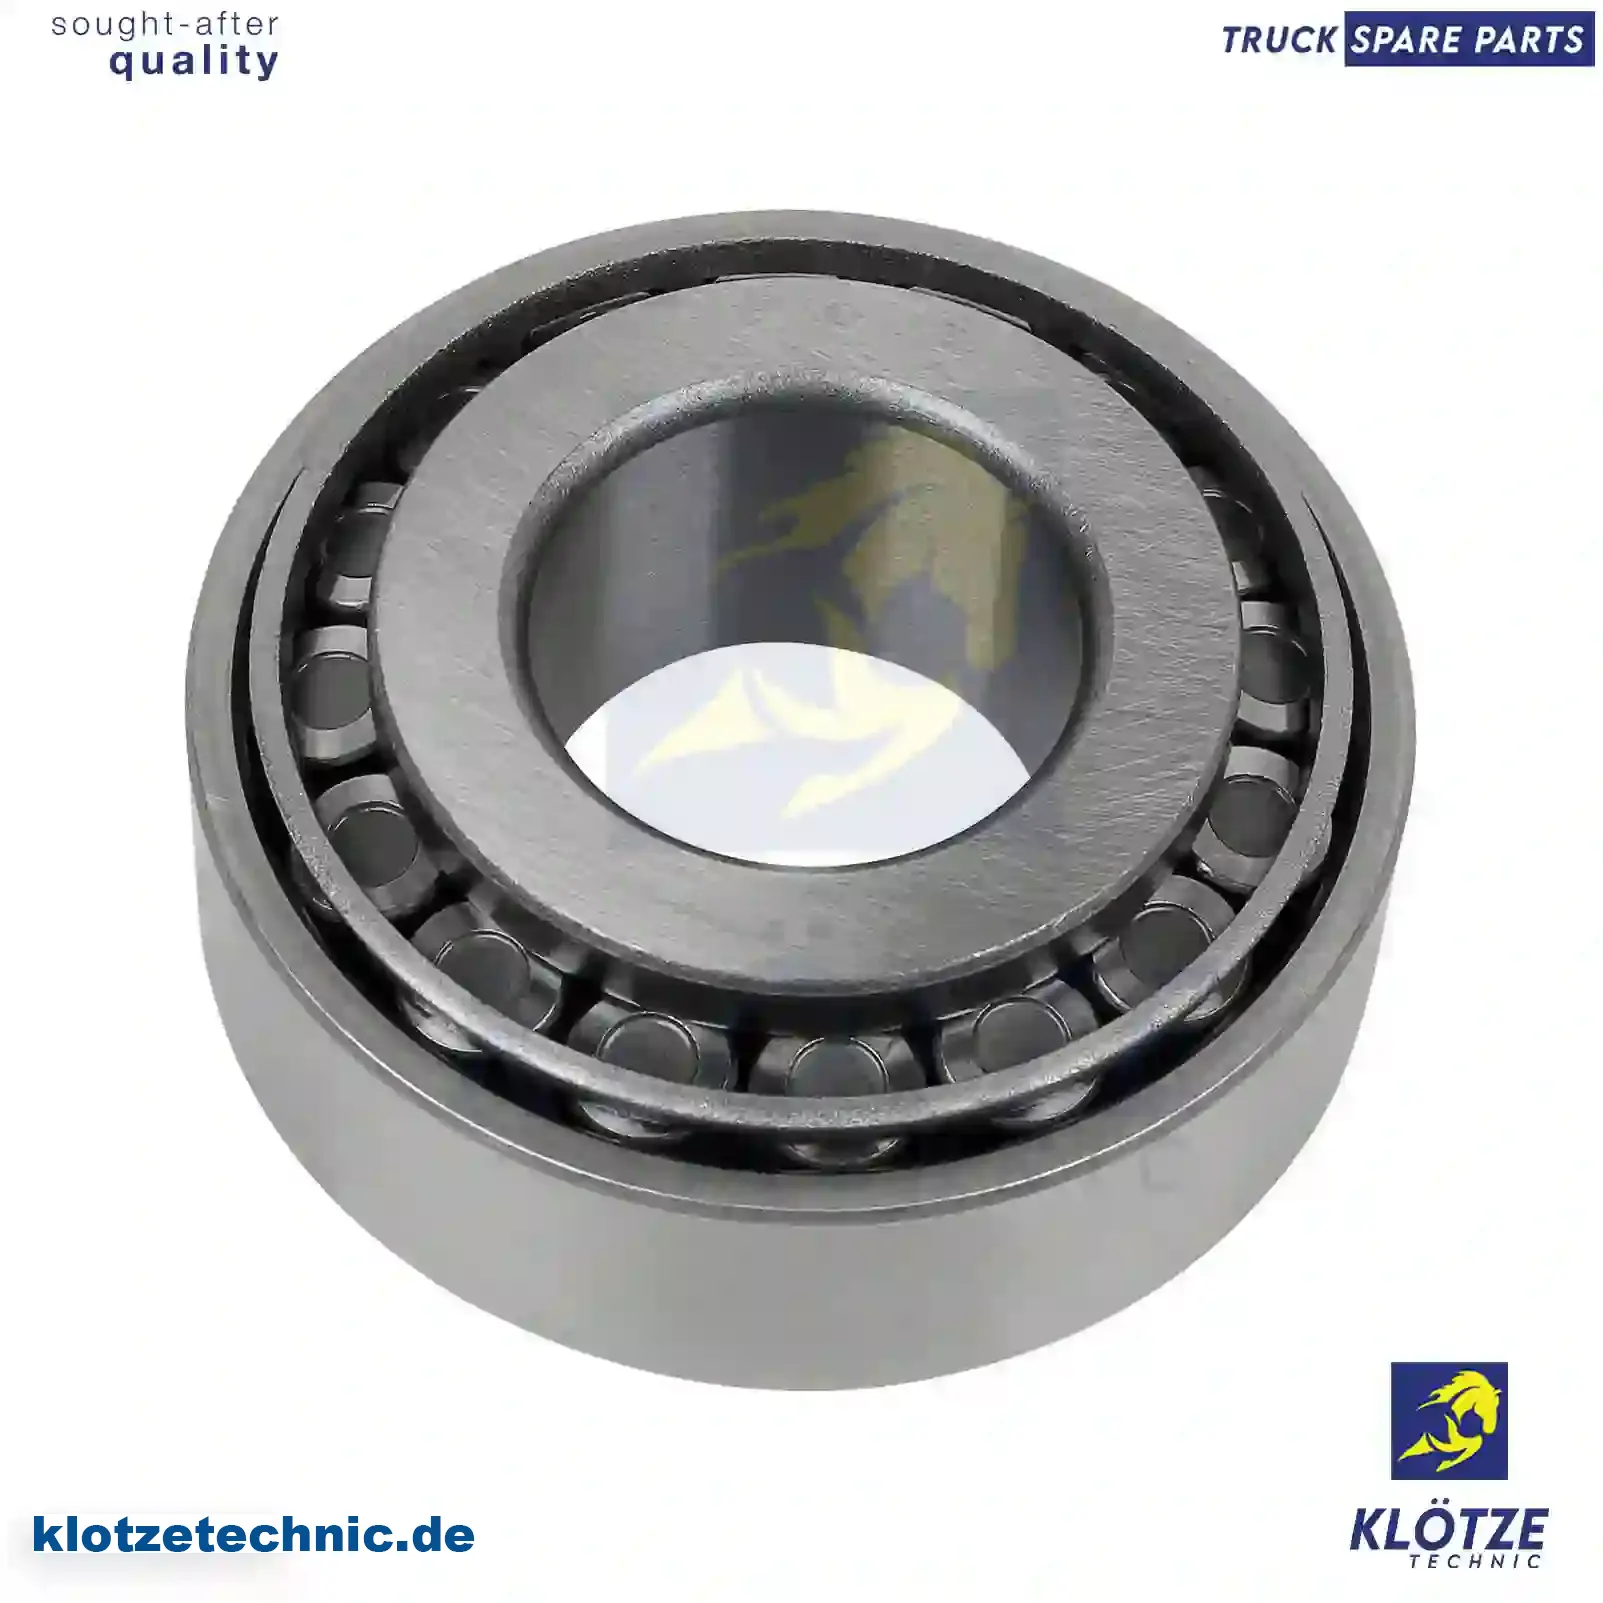 Tapered roller bearing, 26800580, 01126887, 02049337, 07164503, 26800580, 06324990015, 34934200000, 87523400600, A0857596100, 0029816305, 0029816405, 2576334031, 38120-76500, 14698, 181669, 1911816, 322747, 11074, 181668, 181669